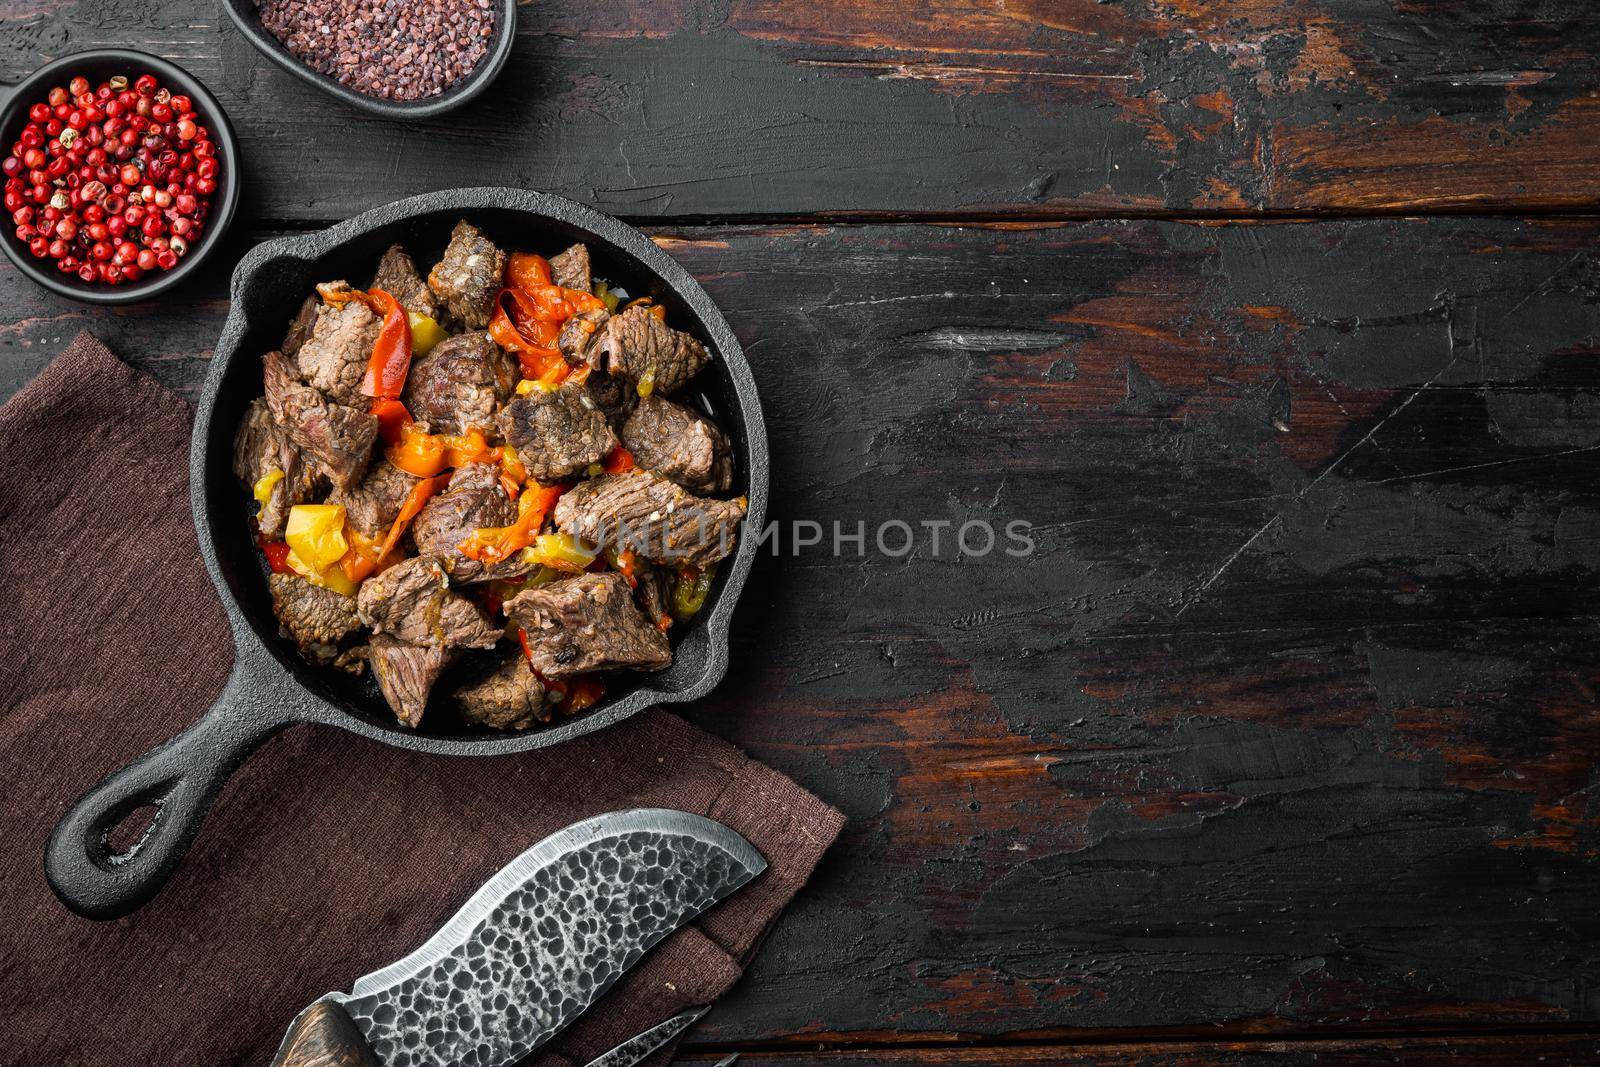 Irish stew made with beef, potatoes, carrots and herbs, in cast iron frying pan, on old dark wooden table , top view flat lay, with copy space for text by Ilianesolenyi